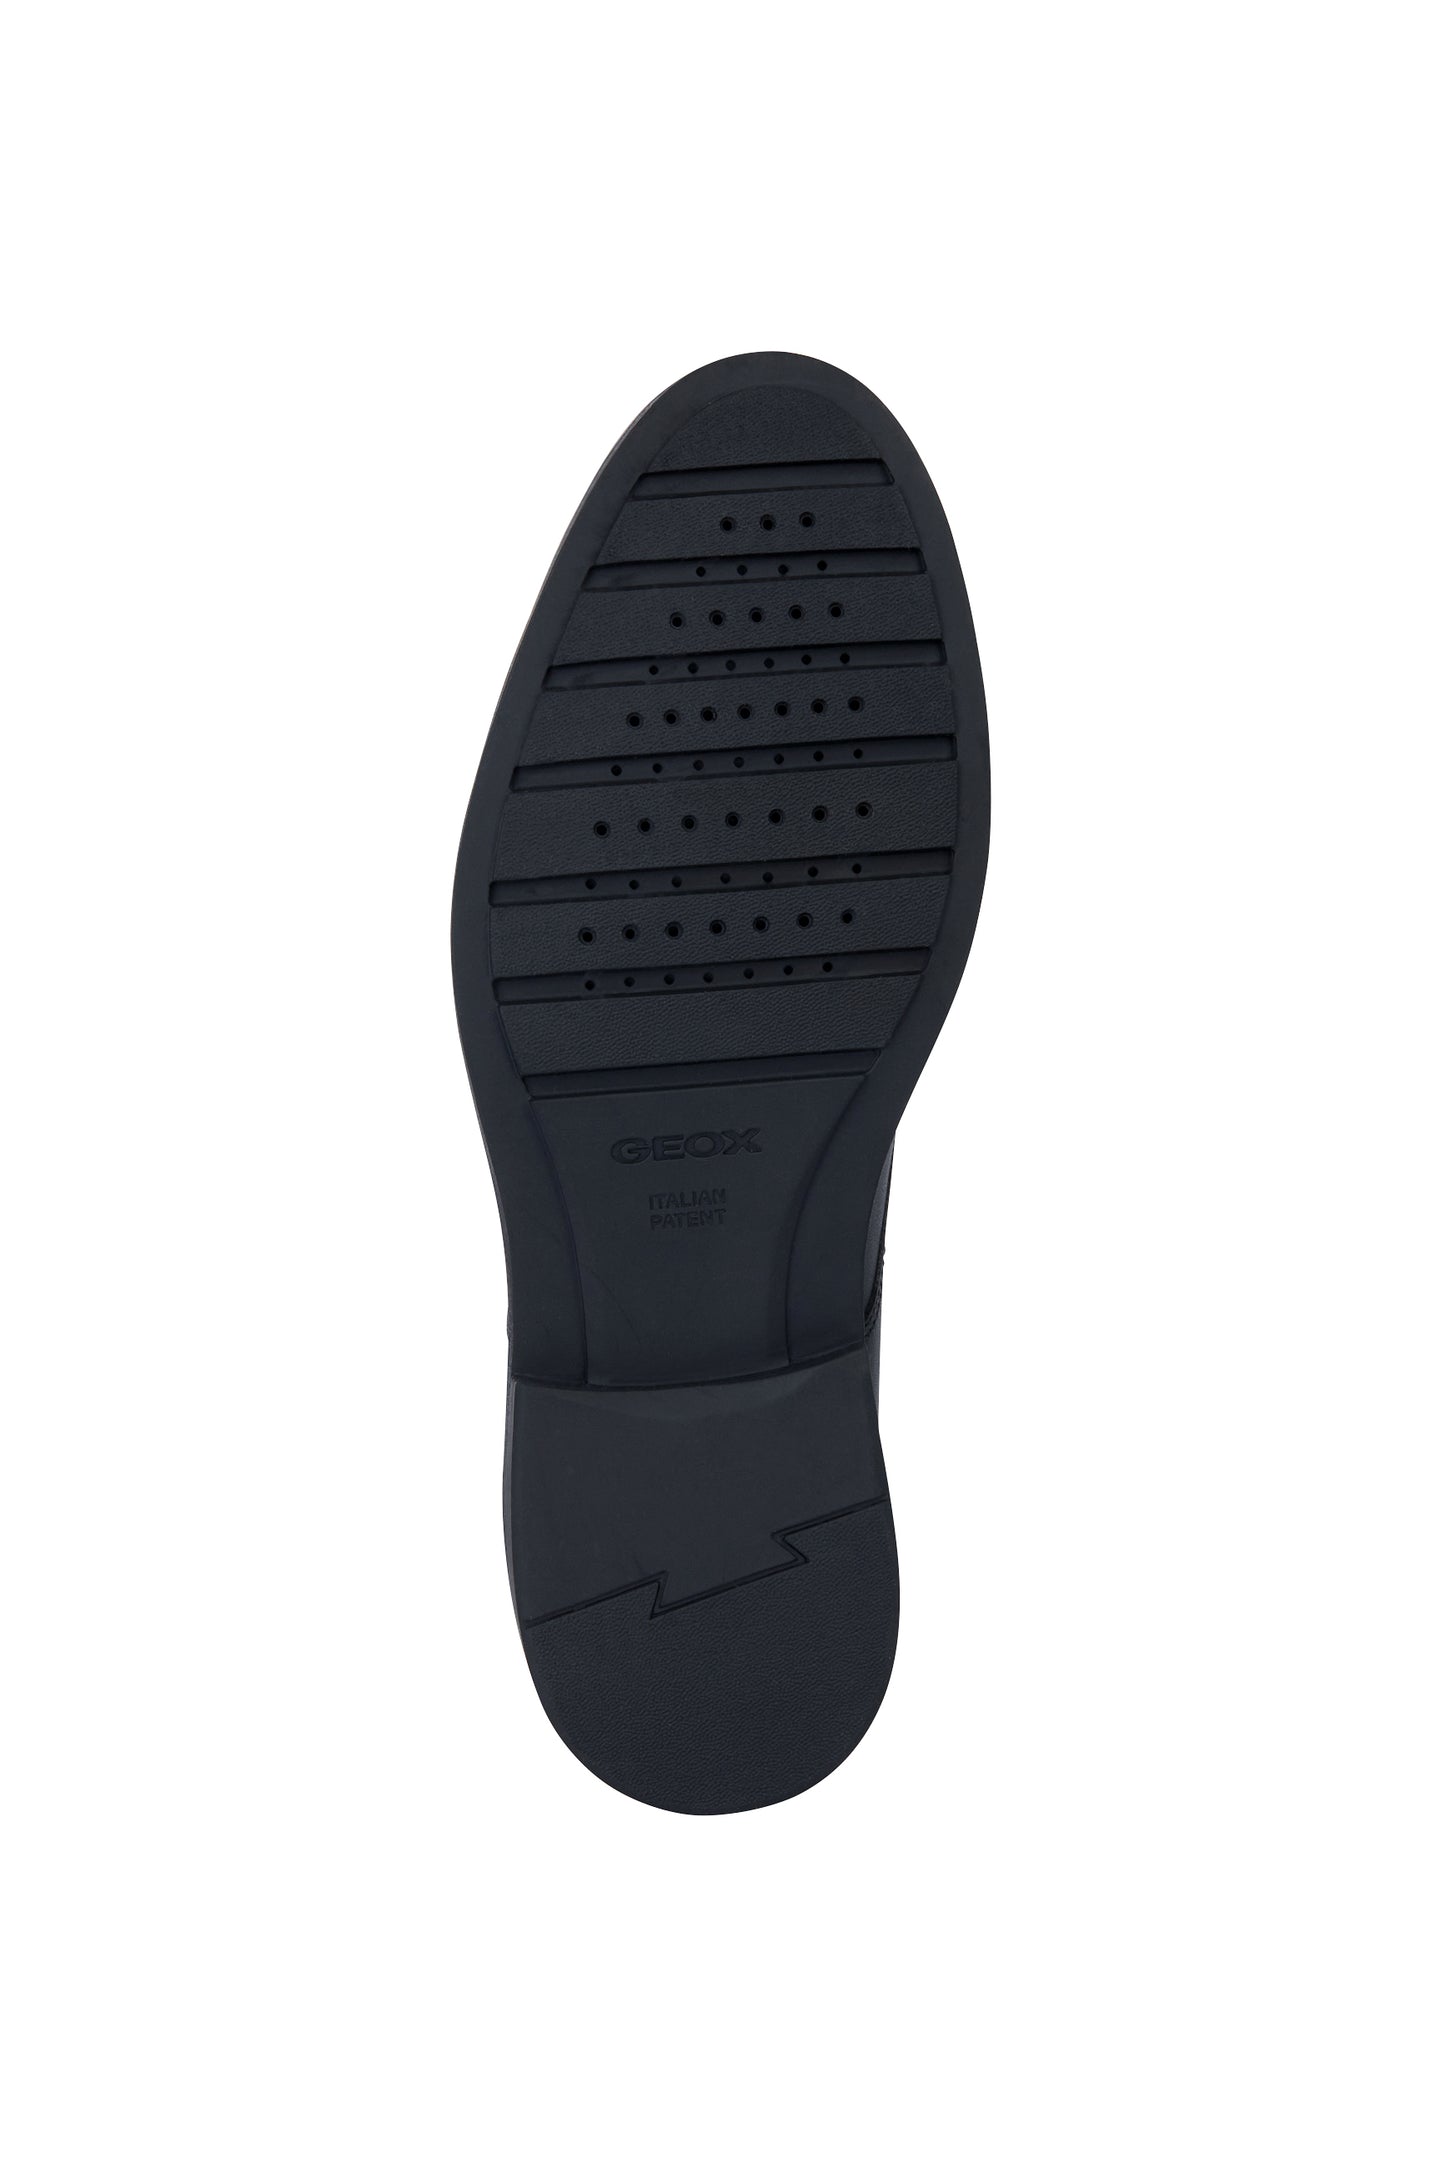 A senior boys school shoe by Geox, style Zheeno, lace-up in black leather. View of sole.